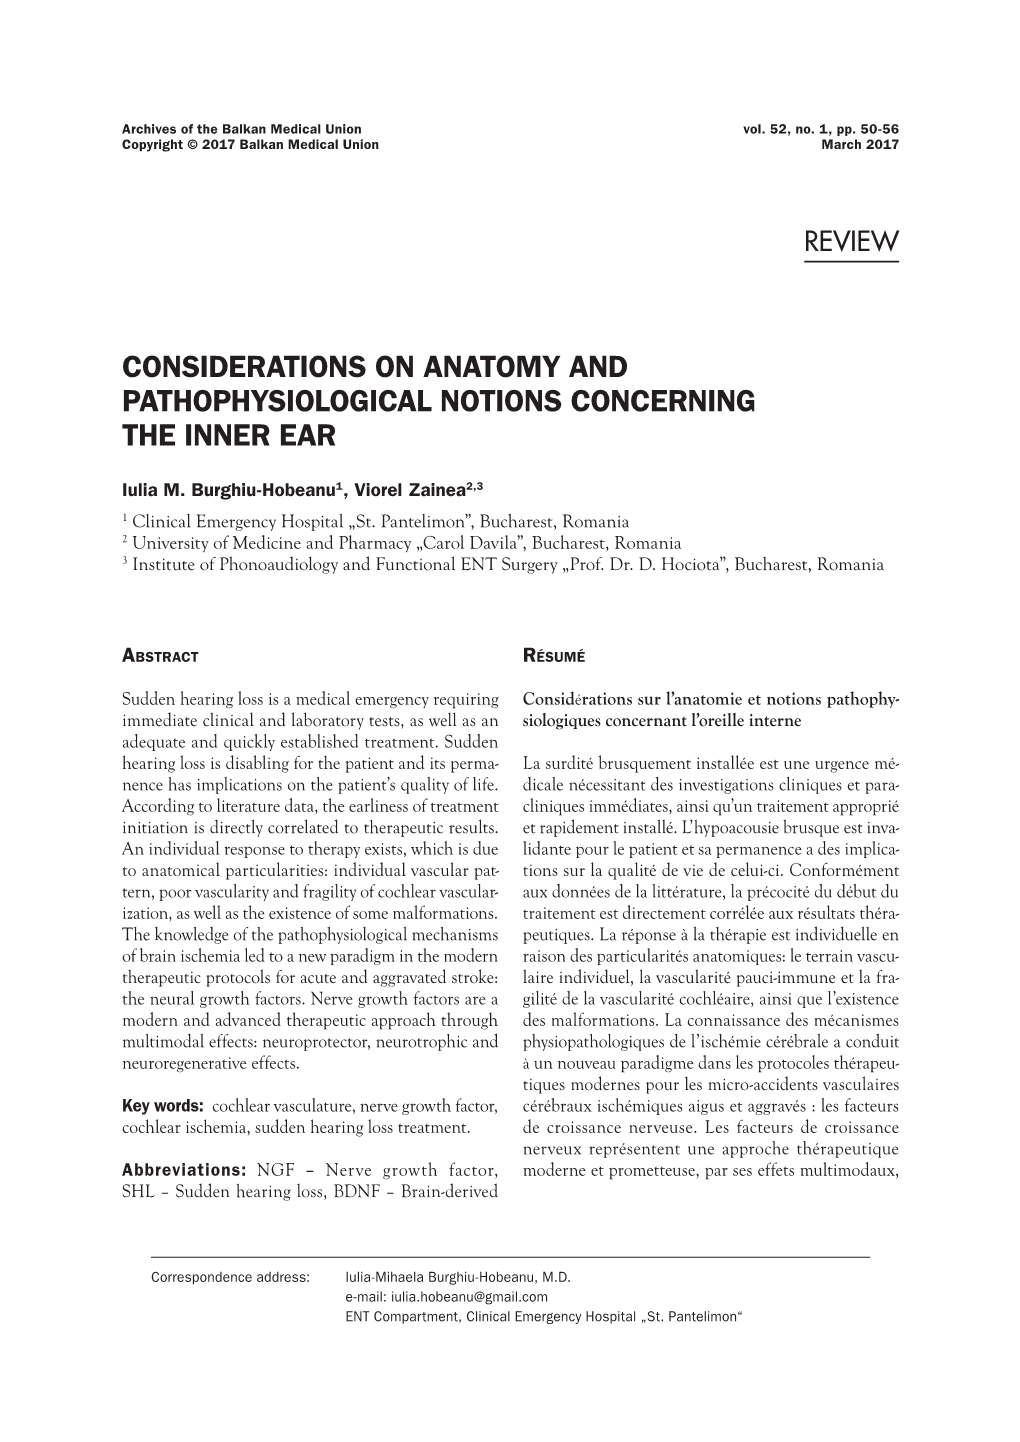 Considerations on Anatomy and Pathophysiological Notions Concerning the Inner Ear